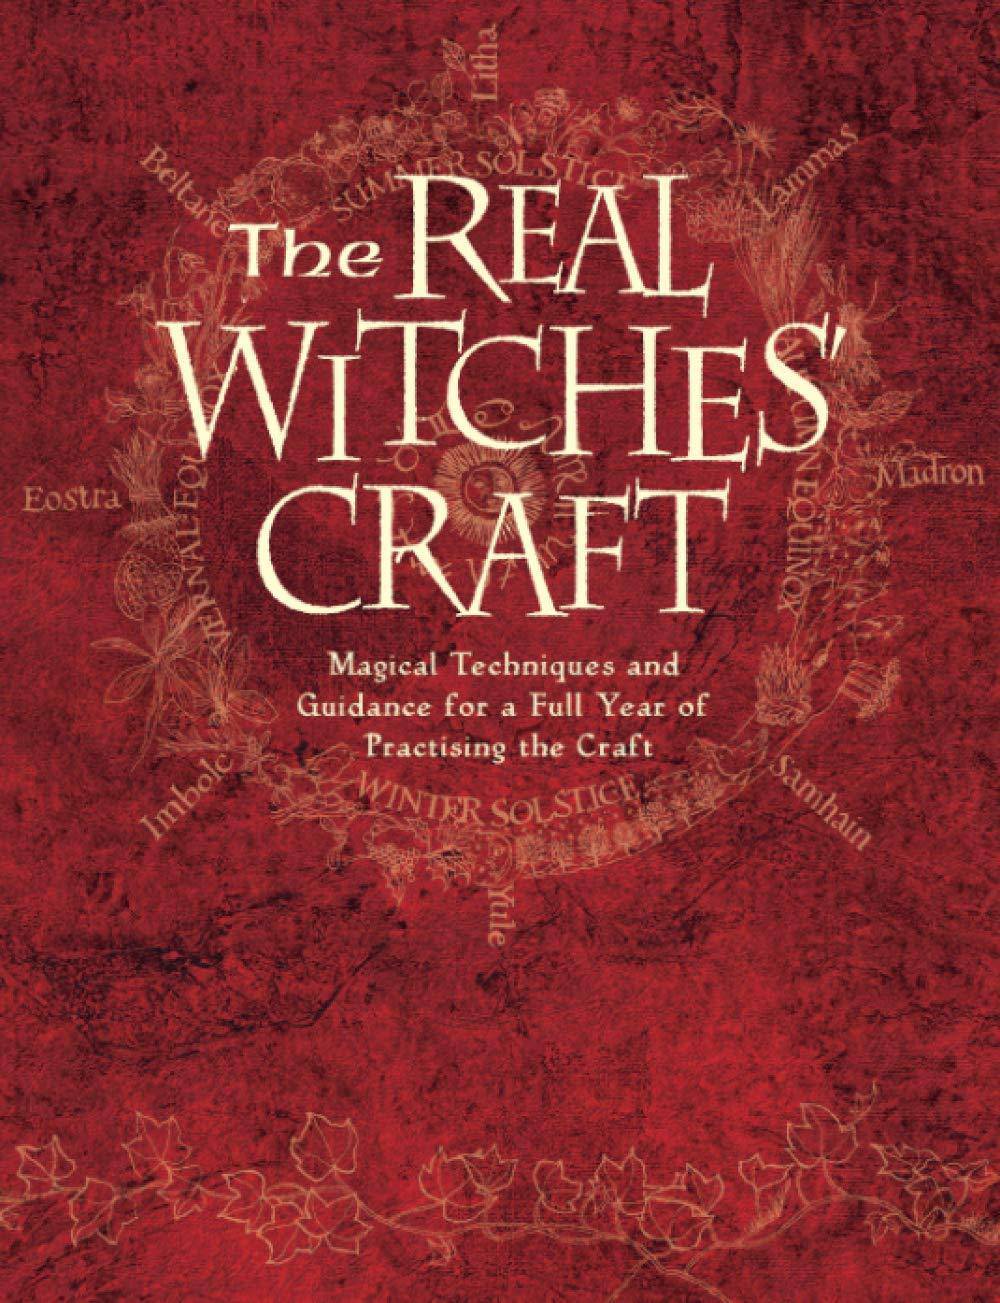 The Real Witches’ Craft - SureShot Books Publishing LLC